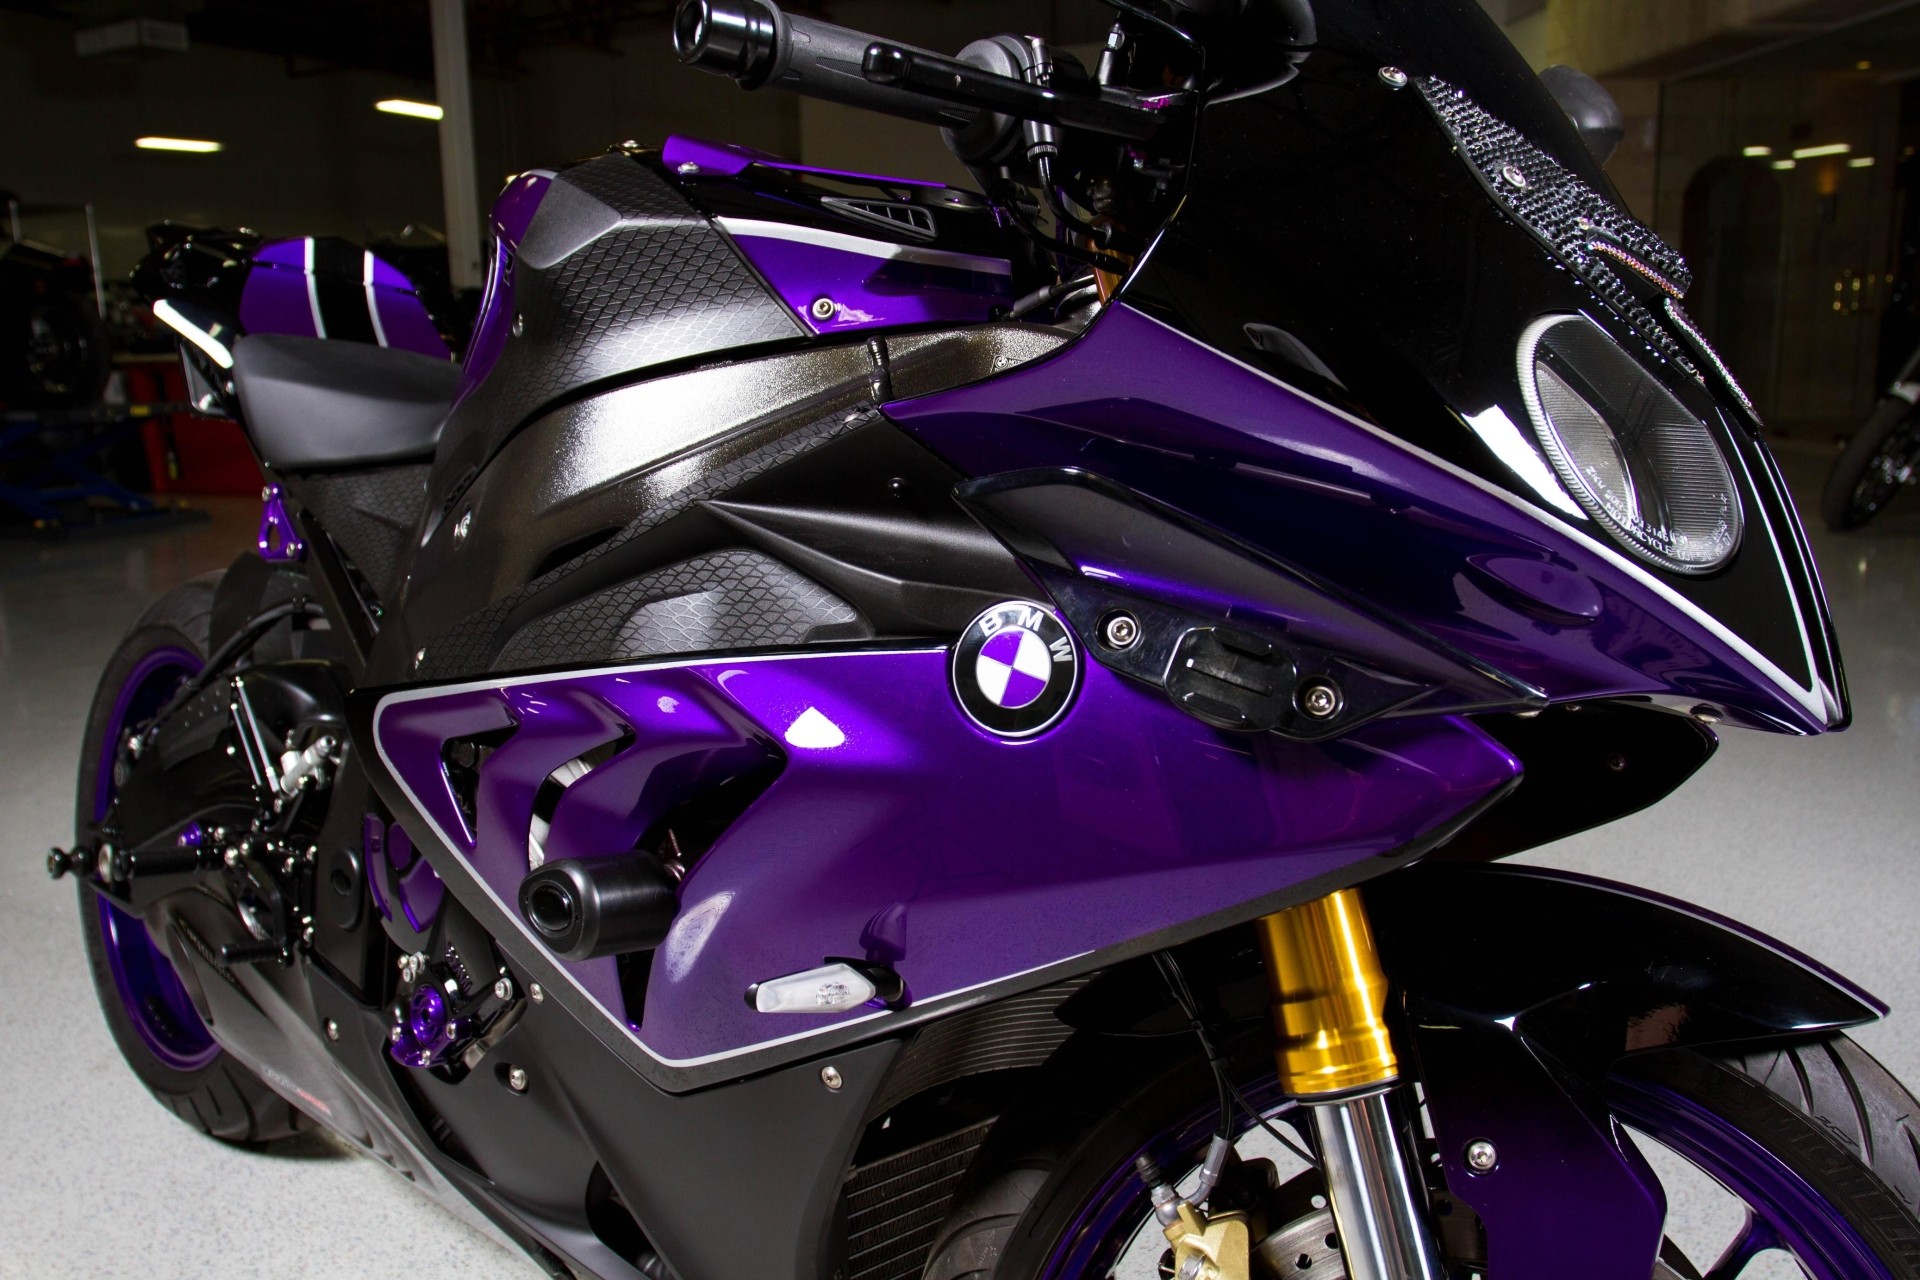 Custom-Paint BMW S1000RR Looks Painfully Awesome - autoevolution